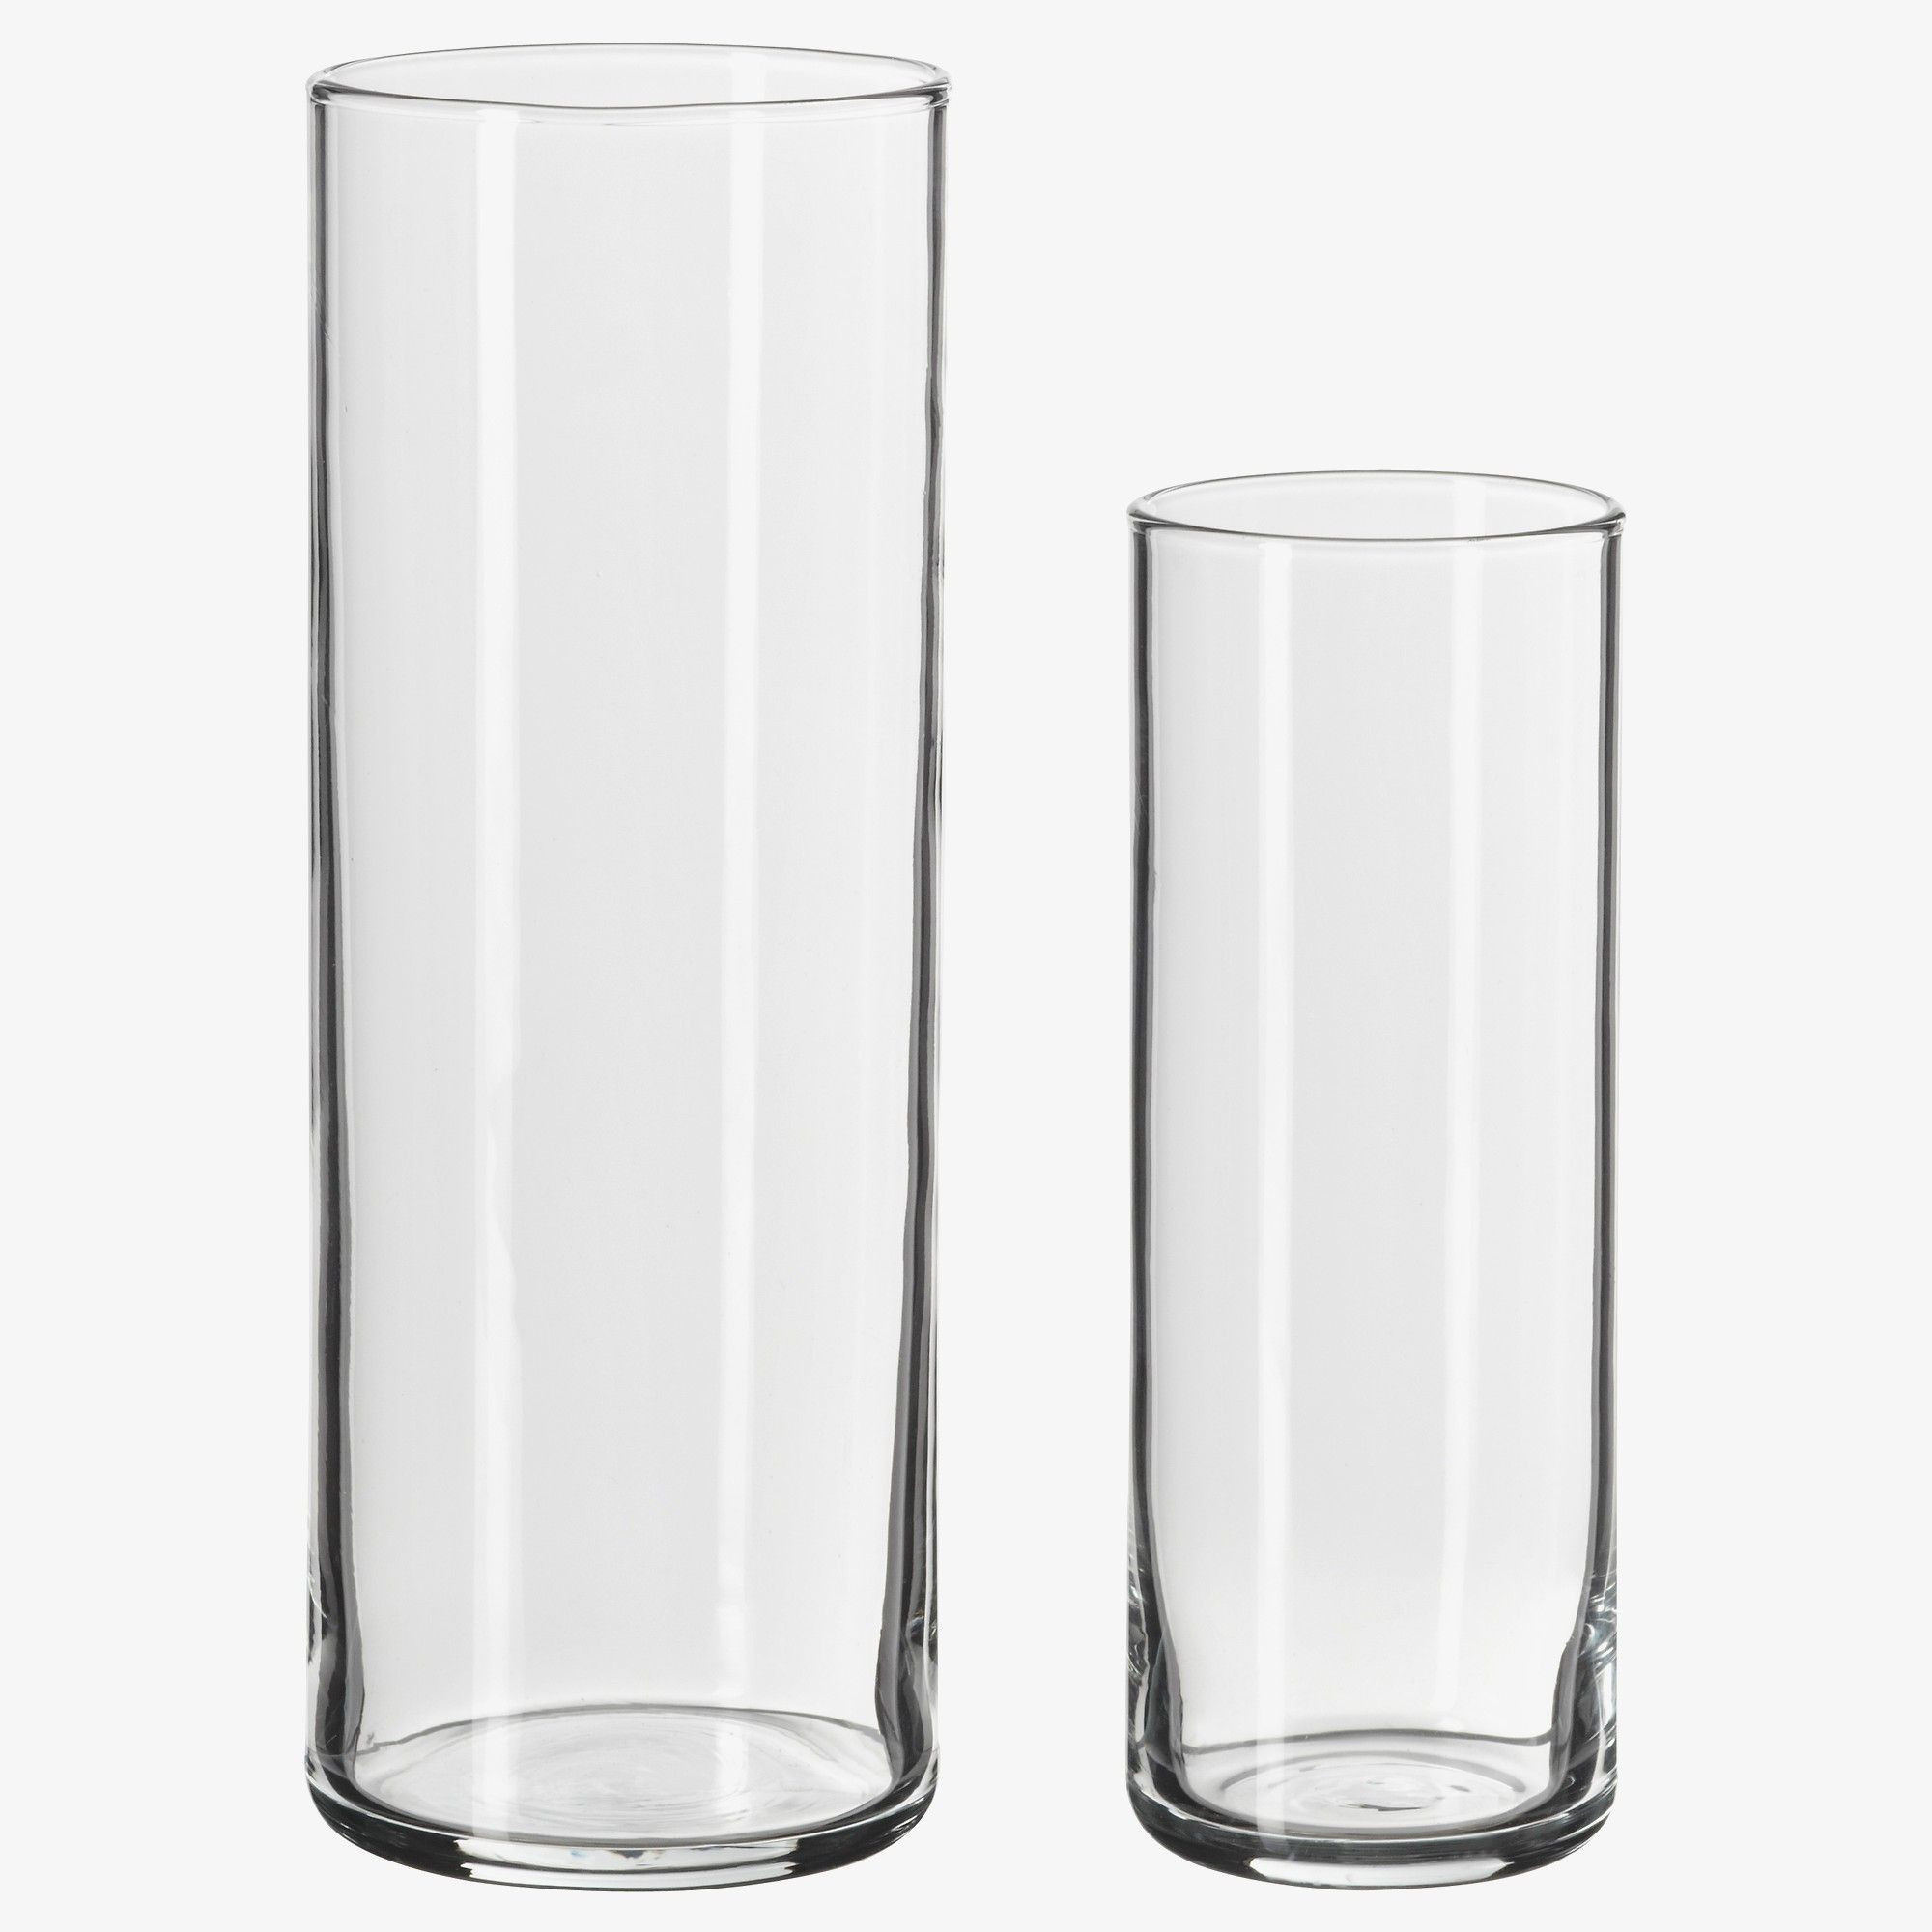 15 Ideal Clear Plastic Vases In Bulk 2023 free download clear plastic vases in bulk of 40 glass vases bulk the weekly world for clear glass tv stand charming new design ikea mantel great pe s5h